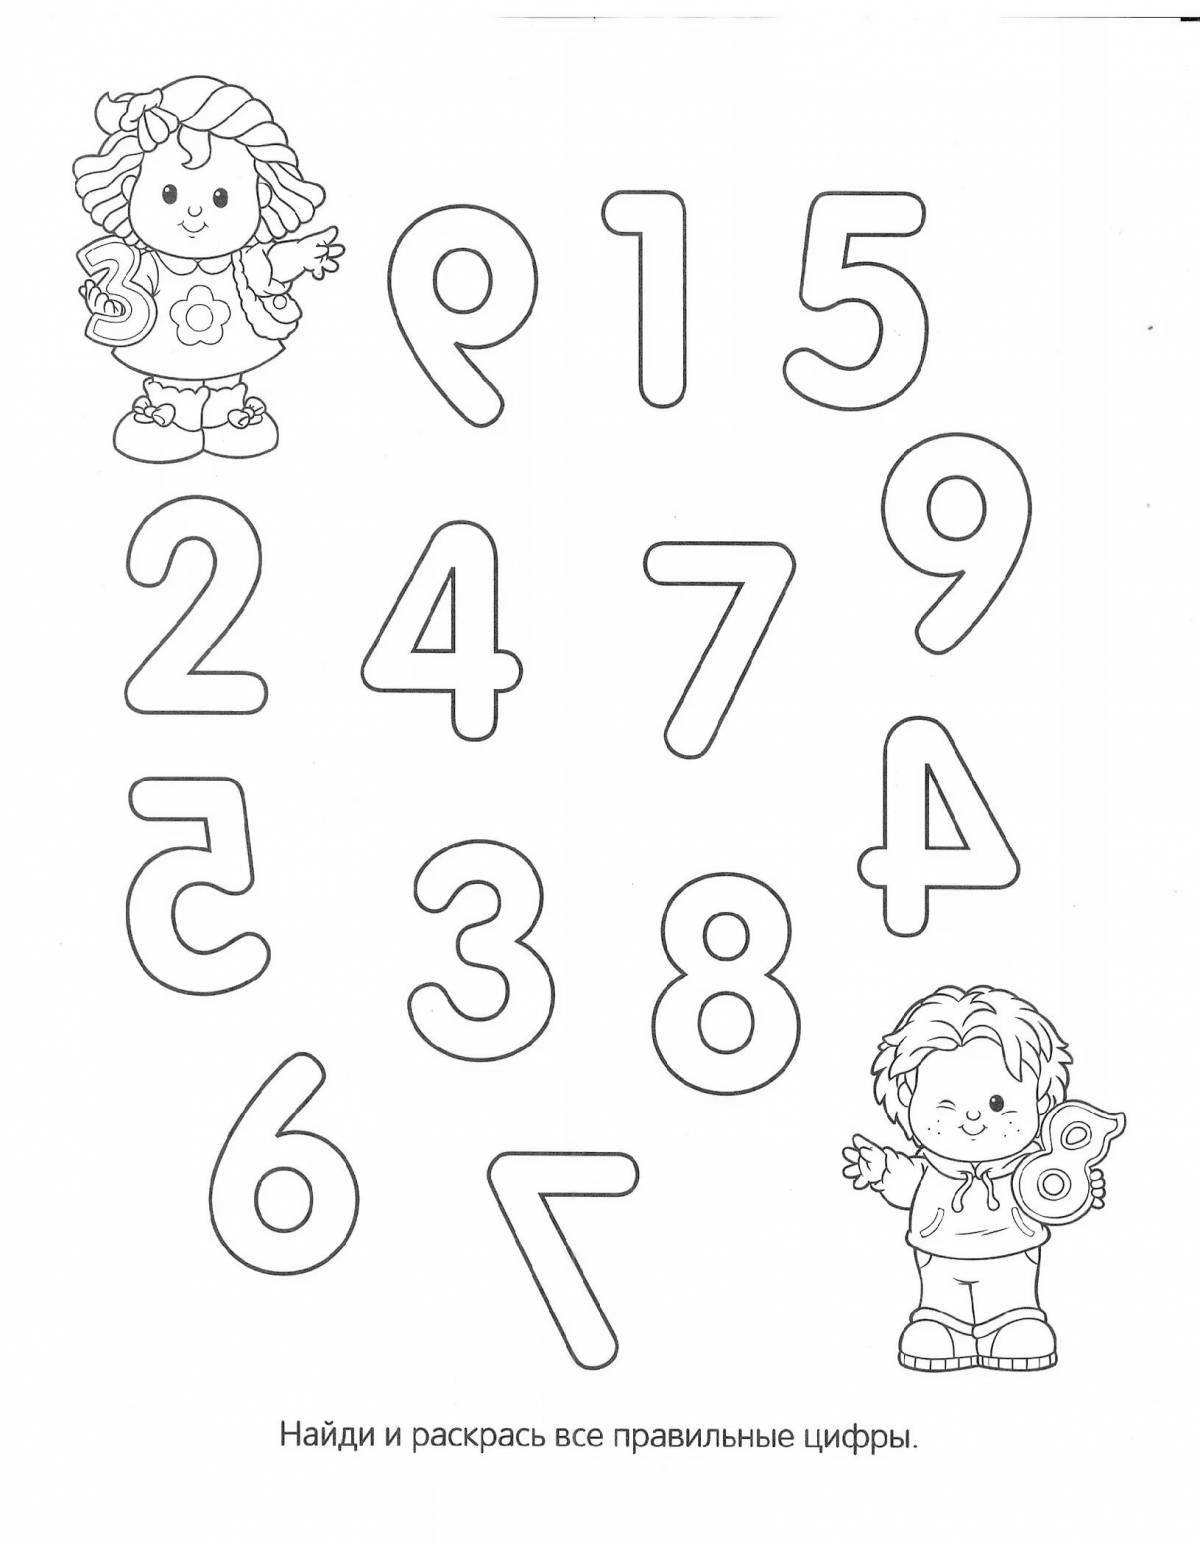 Innovative coloring book with letters and numbers for preschoolers